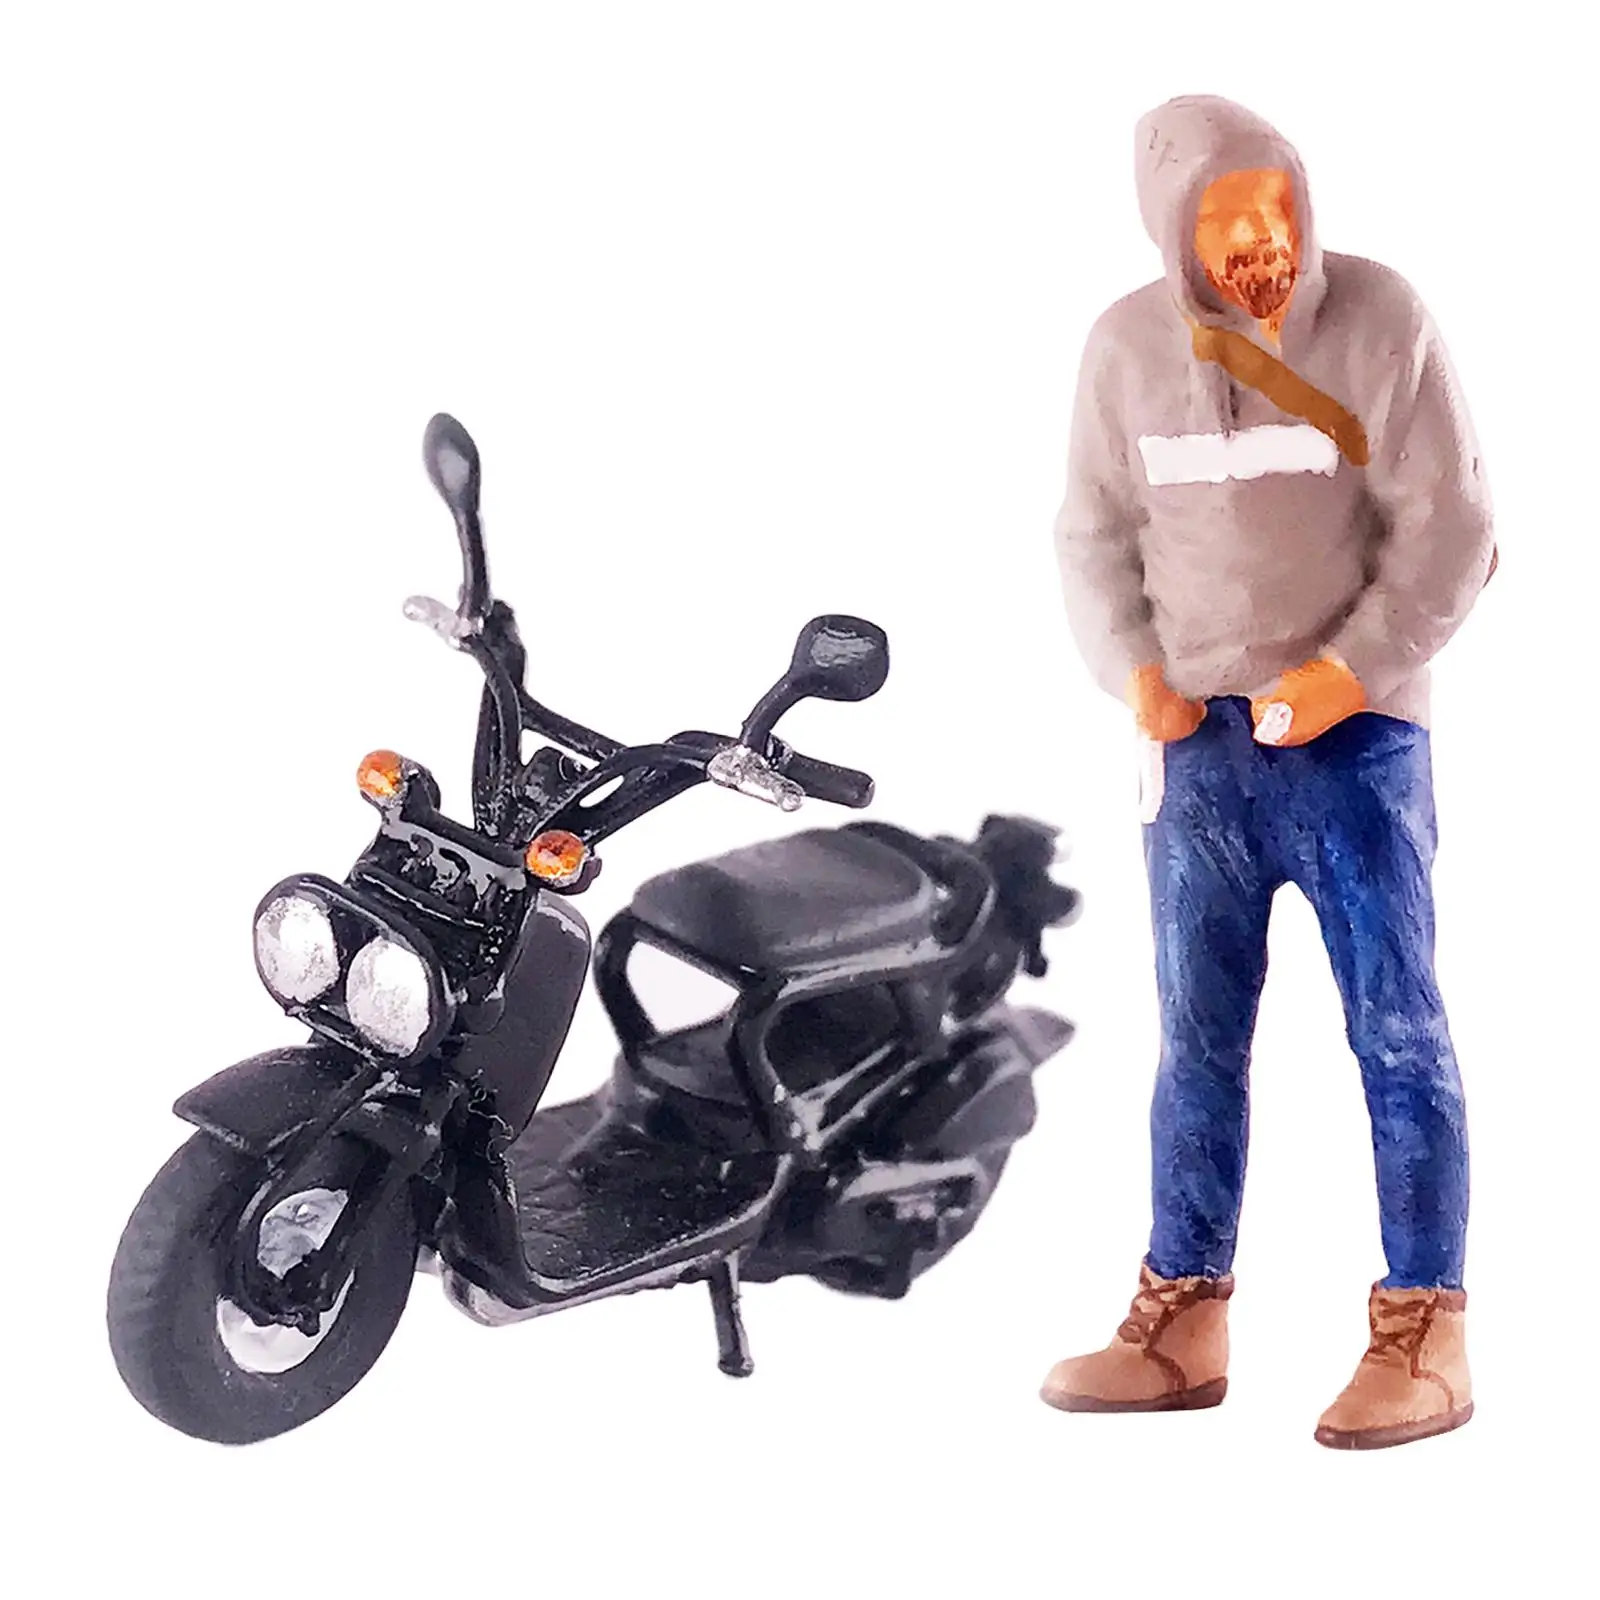 1:64 Figure Driving Motorcycle Movie Character Scene, Model Train Diorama Scenery DIY Projects Accessory, S Gauge